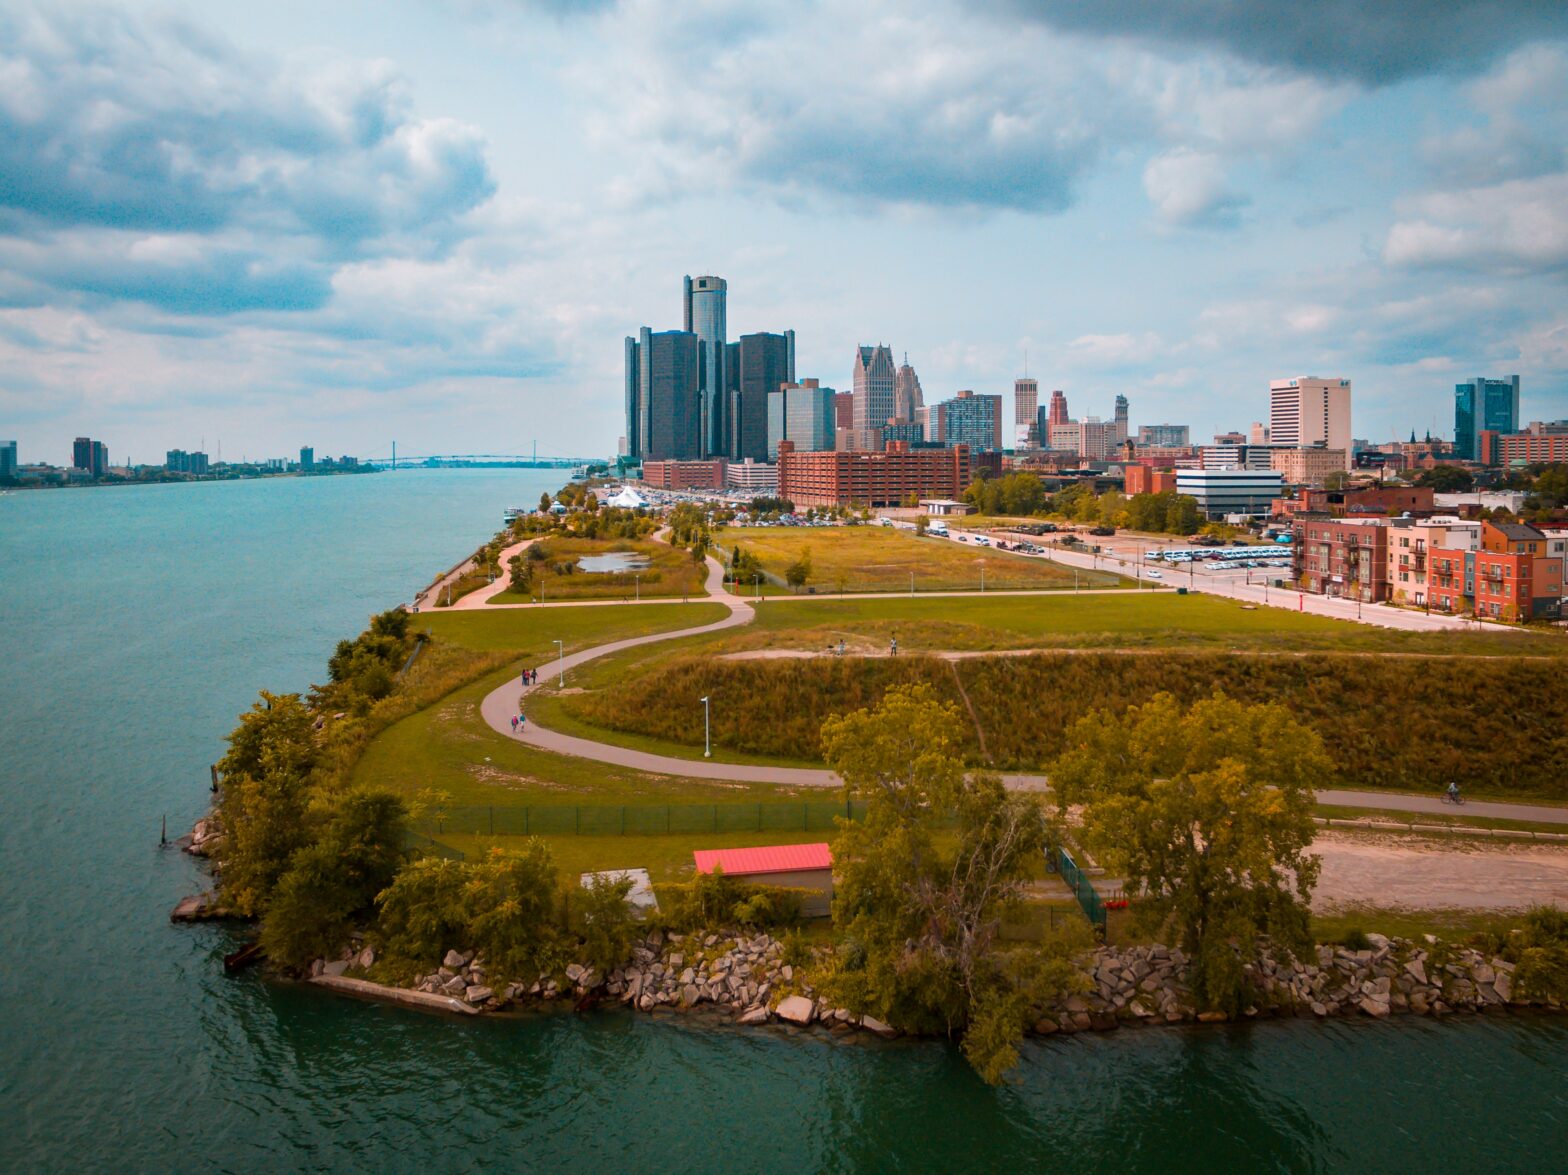 10 Things To Do In Detroit For $20 Or Less